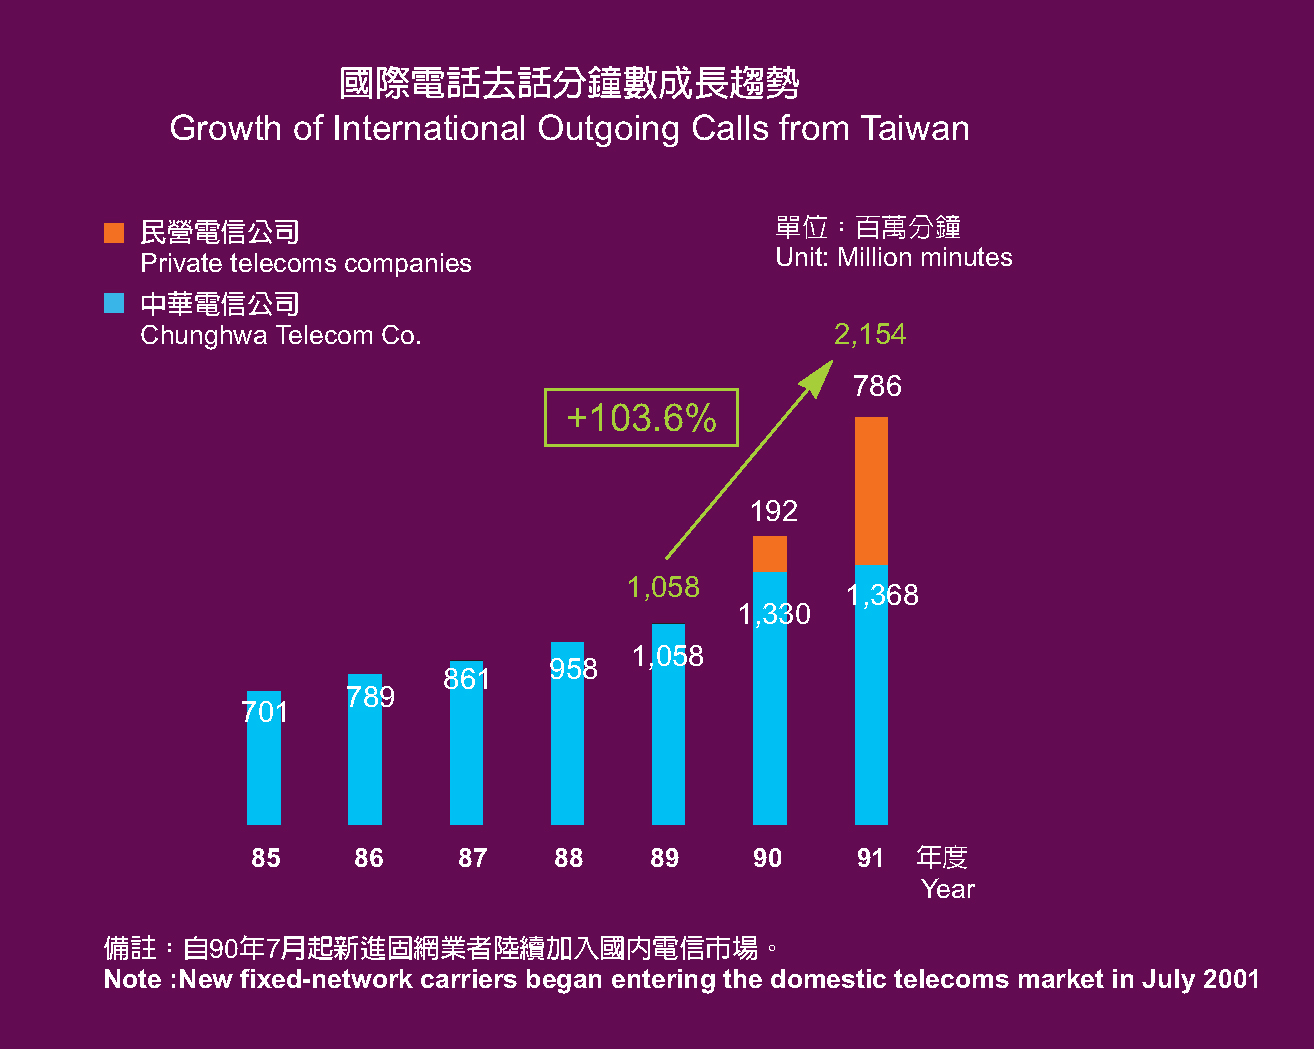 Growth of International Outgoing Calls from Taiwan